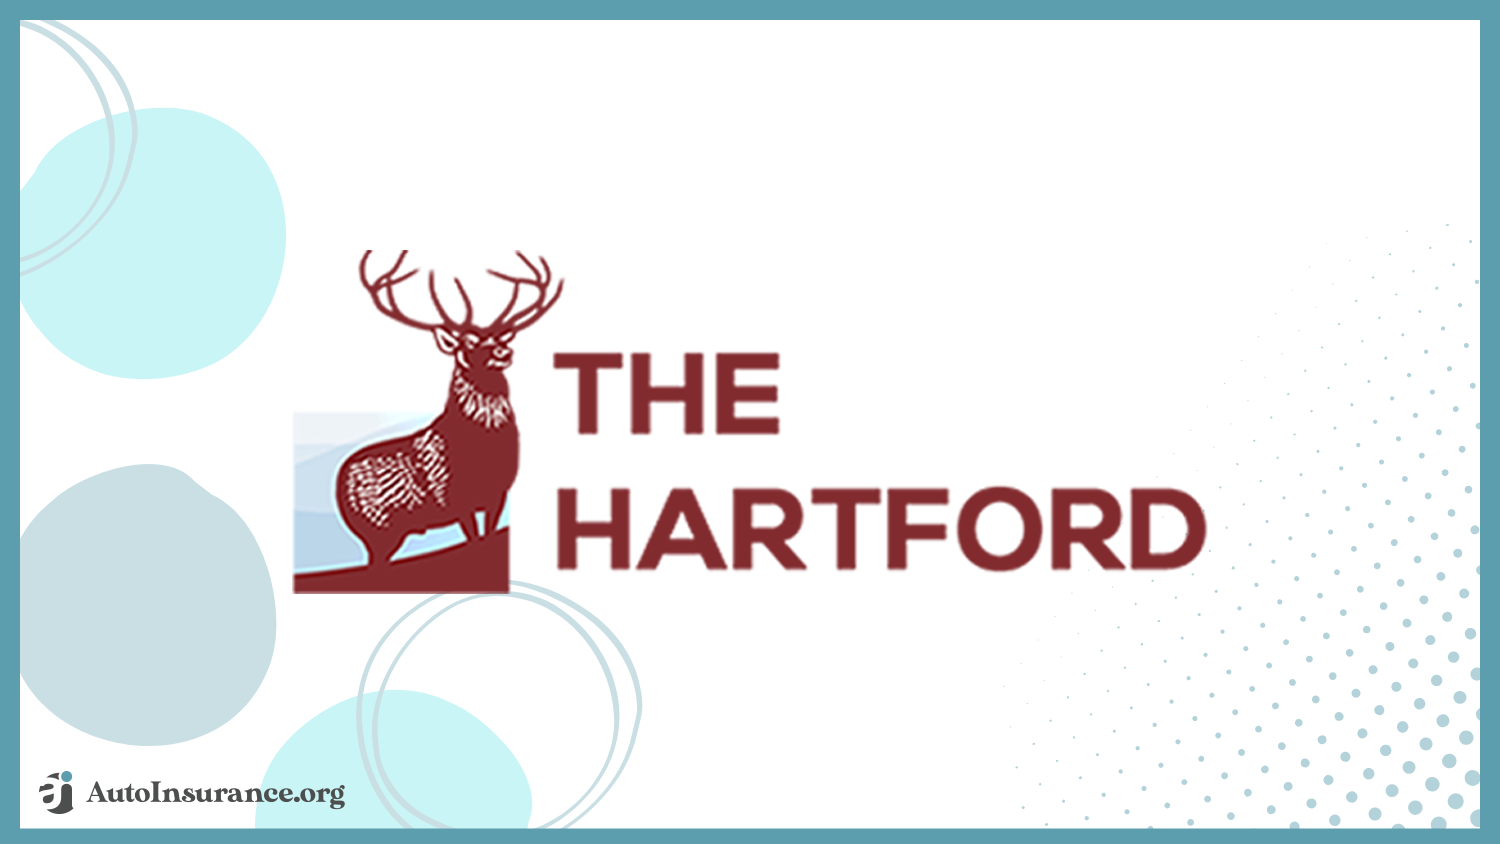 The Hartford: Best Auto Insurance for Military Families and Veterans 